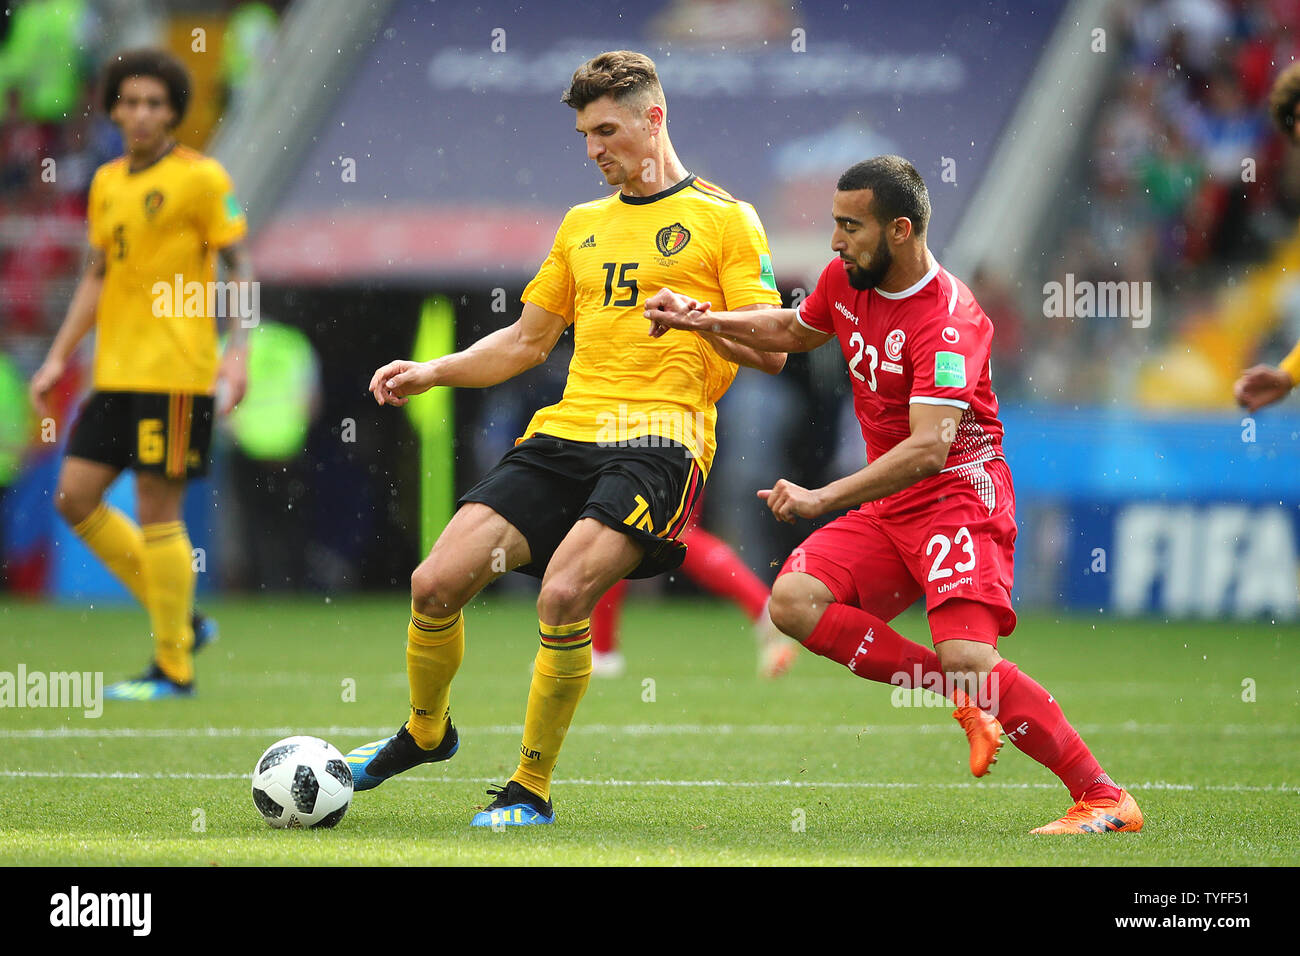 Thomas Meunier of Belgium (L) is challenged by Naim Sliti of Tunisia during the 2018 FIFA World Cup Group G match at the Spartak Stadium in Moscow, Russia on June 23, 2018. Belgium defeated Tunisia 5-2.   Photo by Chris Brunskill/UPI Stock Photo